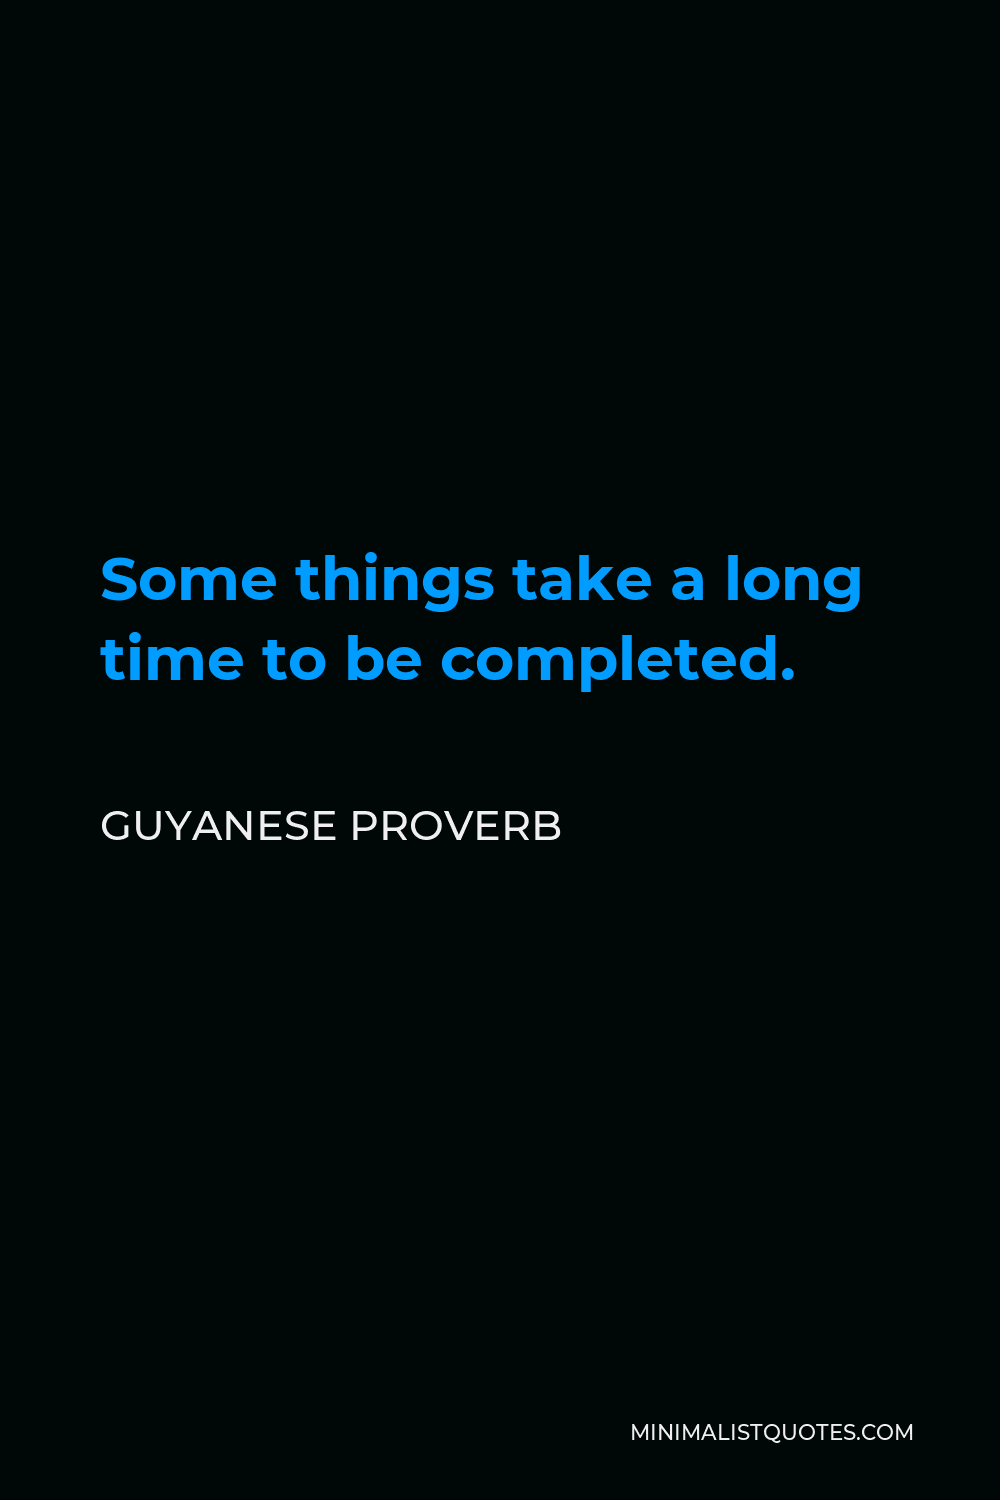 Guyanese Proverb Quote - Some things take a long time to be completed.